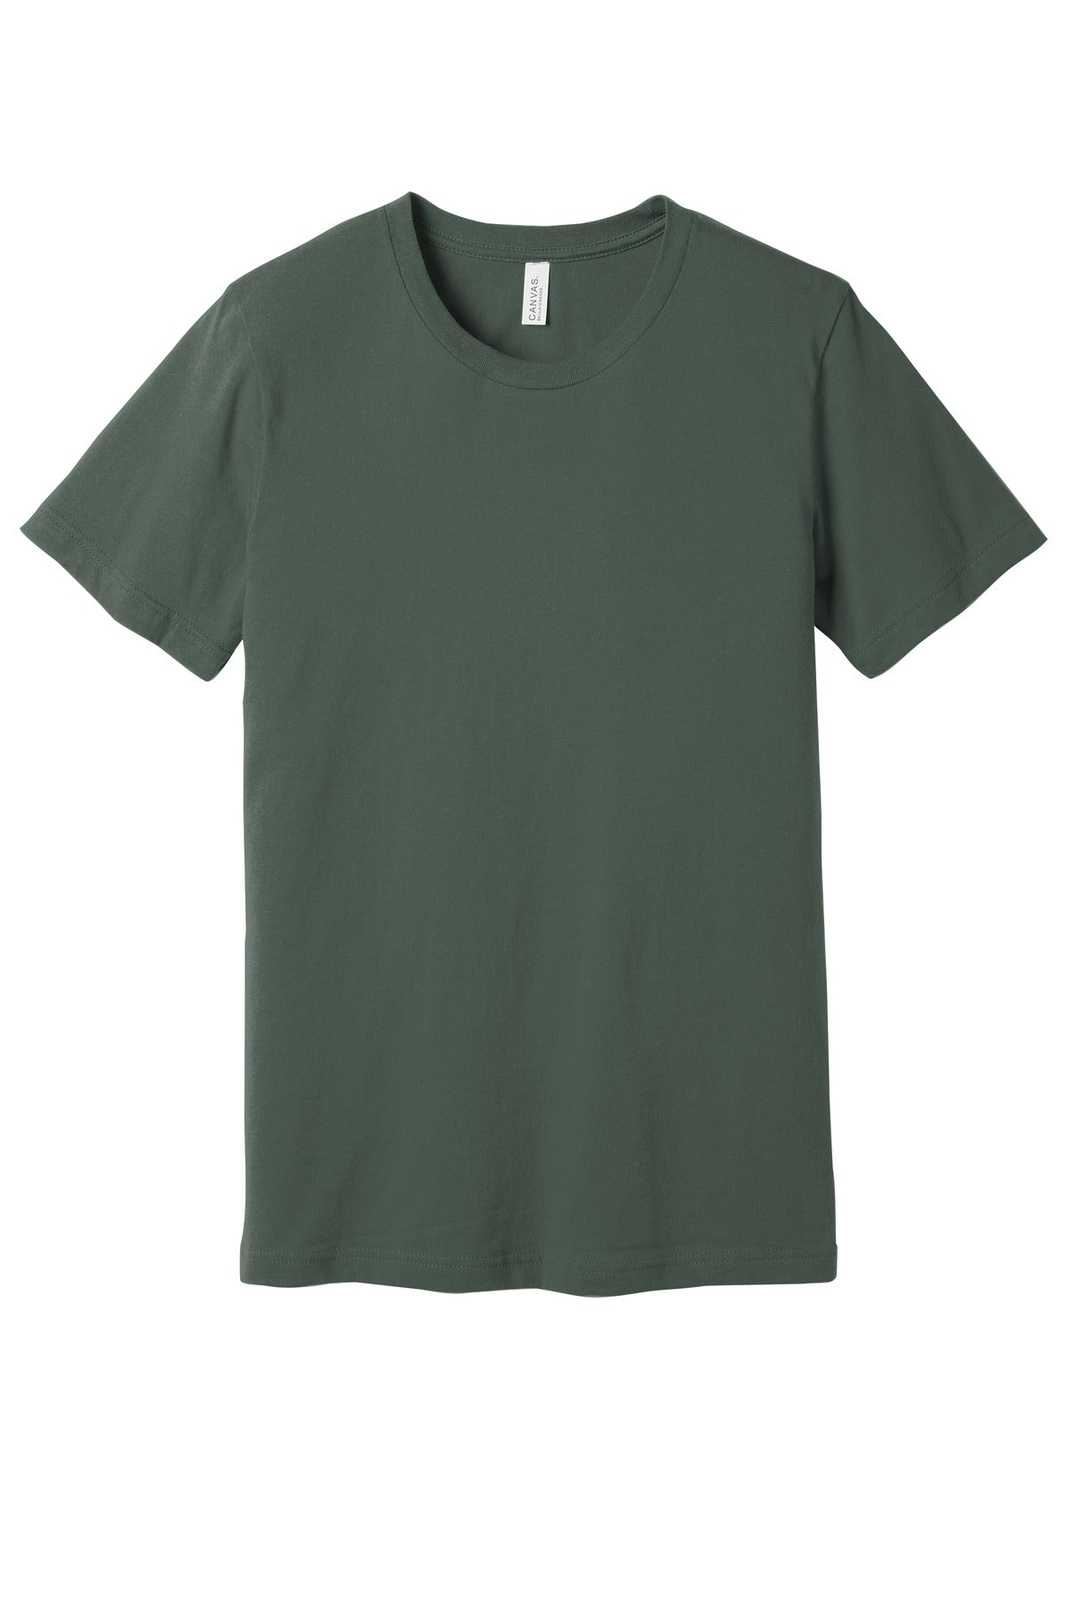 Bella + Canvas 3001 Unisex Jersey Short Sleeve Tee - Military Green - HIT a Double